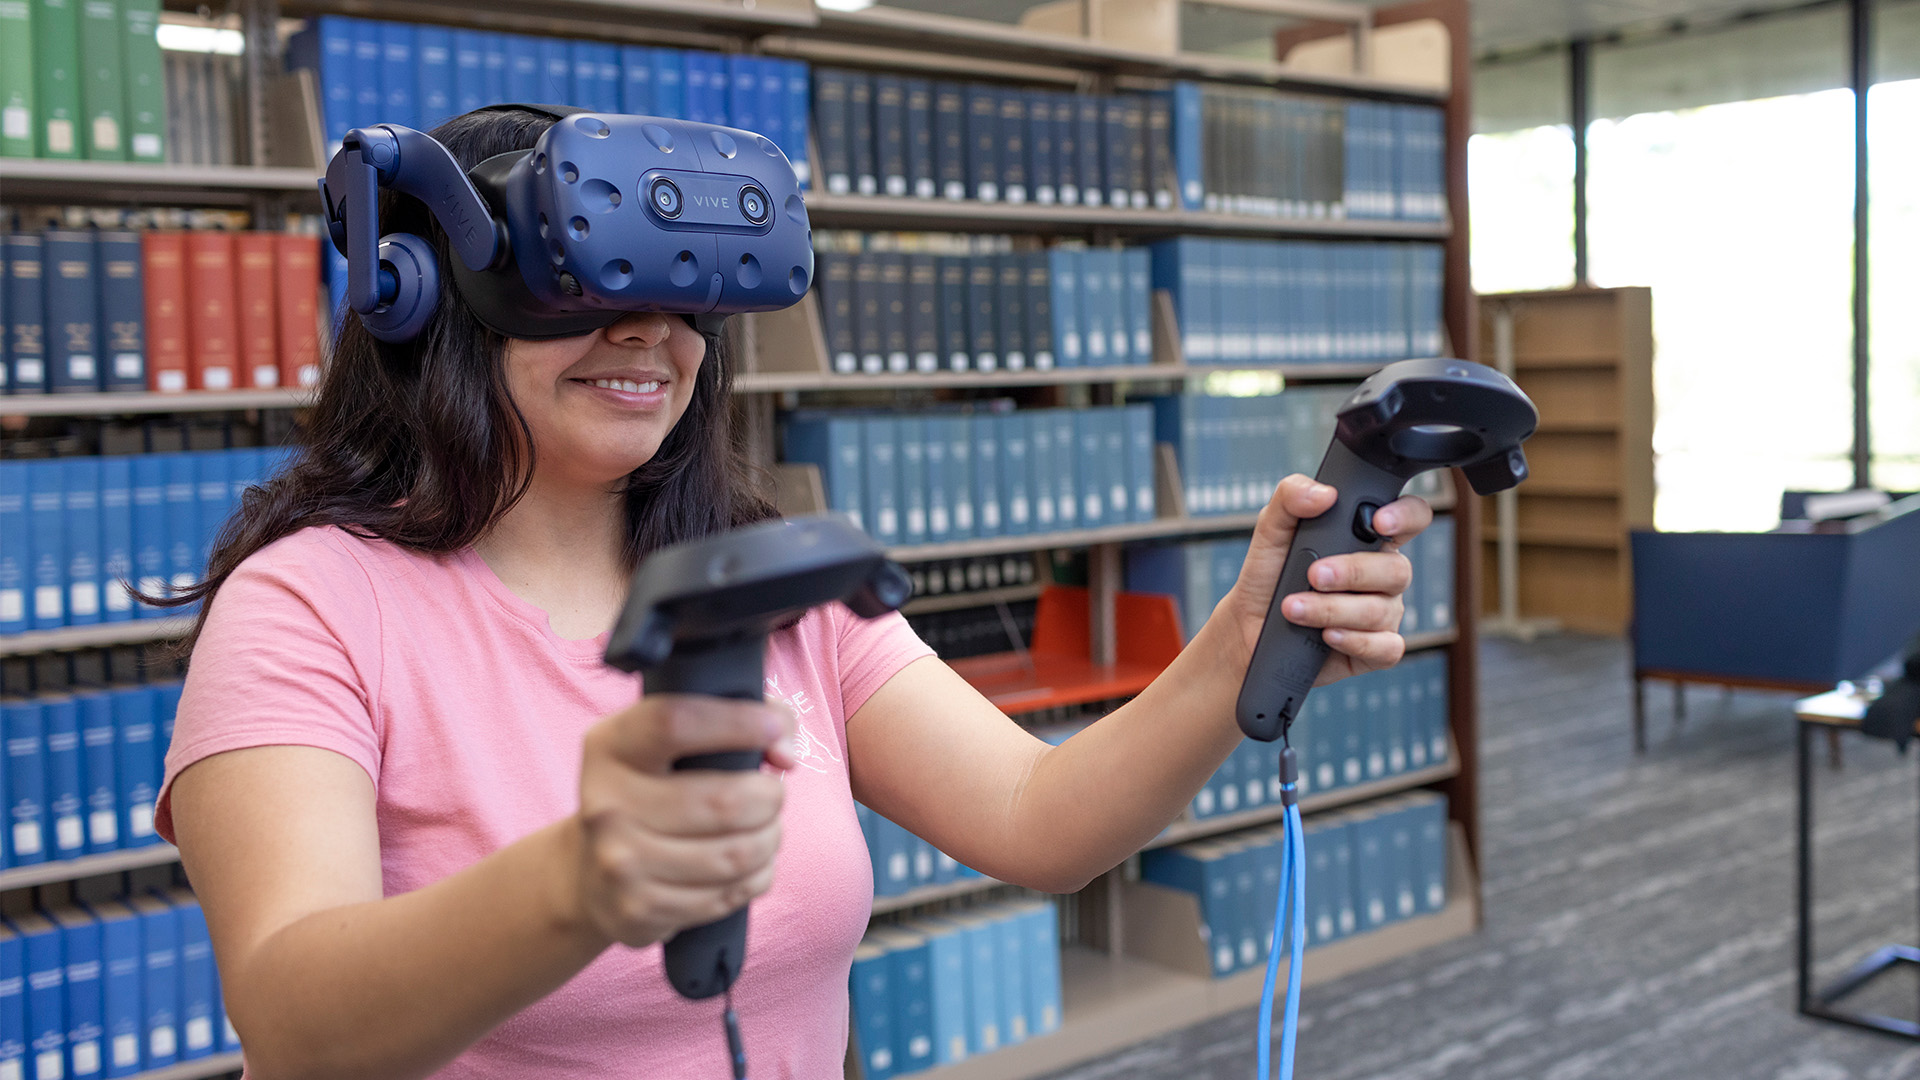 A student using a virtual reality headset in the library